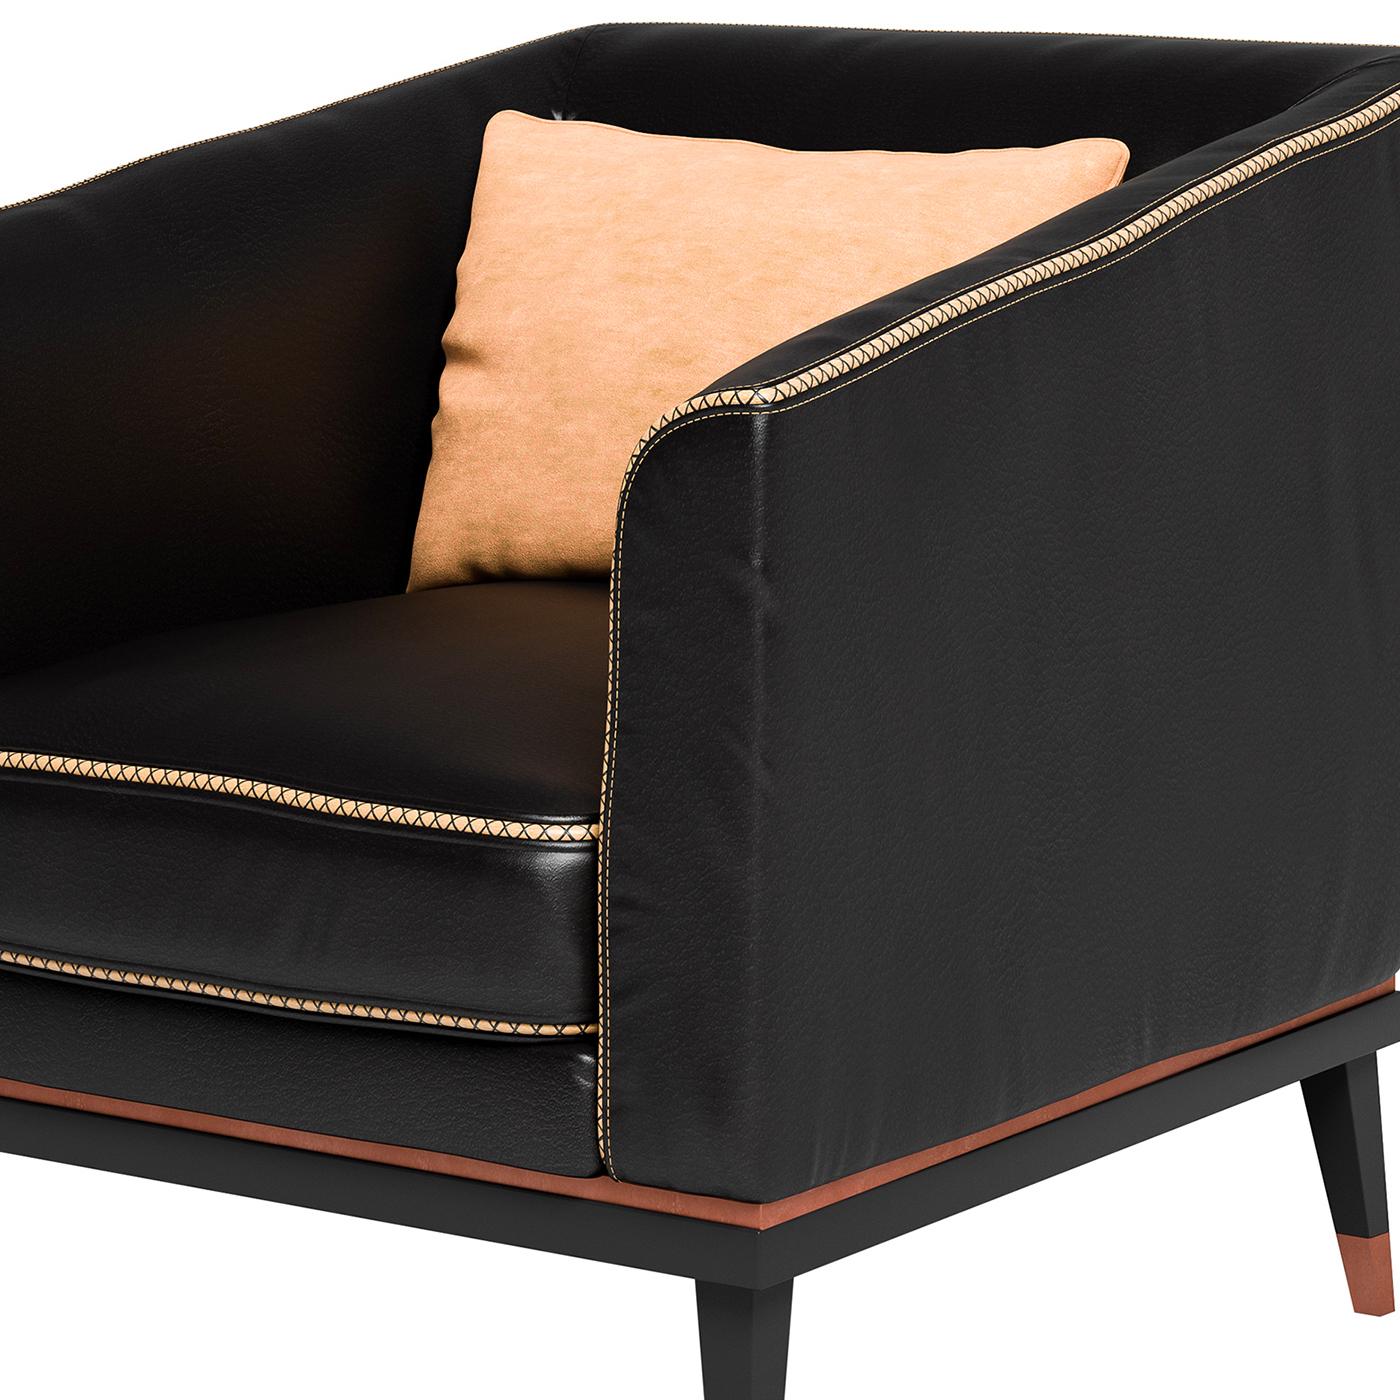 Dynamic lines and streamlined proportions characterize this exceptional armchair that will add modern flair and create a luxurious ambiance in a monochromatic, modern living room. Marked by a geometric silhouette with straight armrests and back,